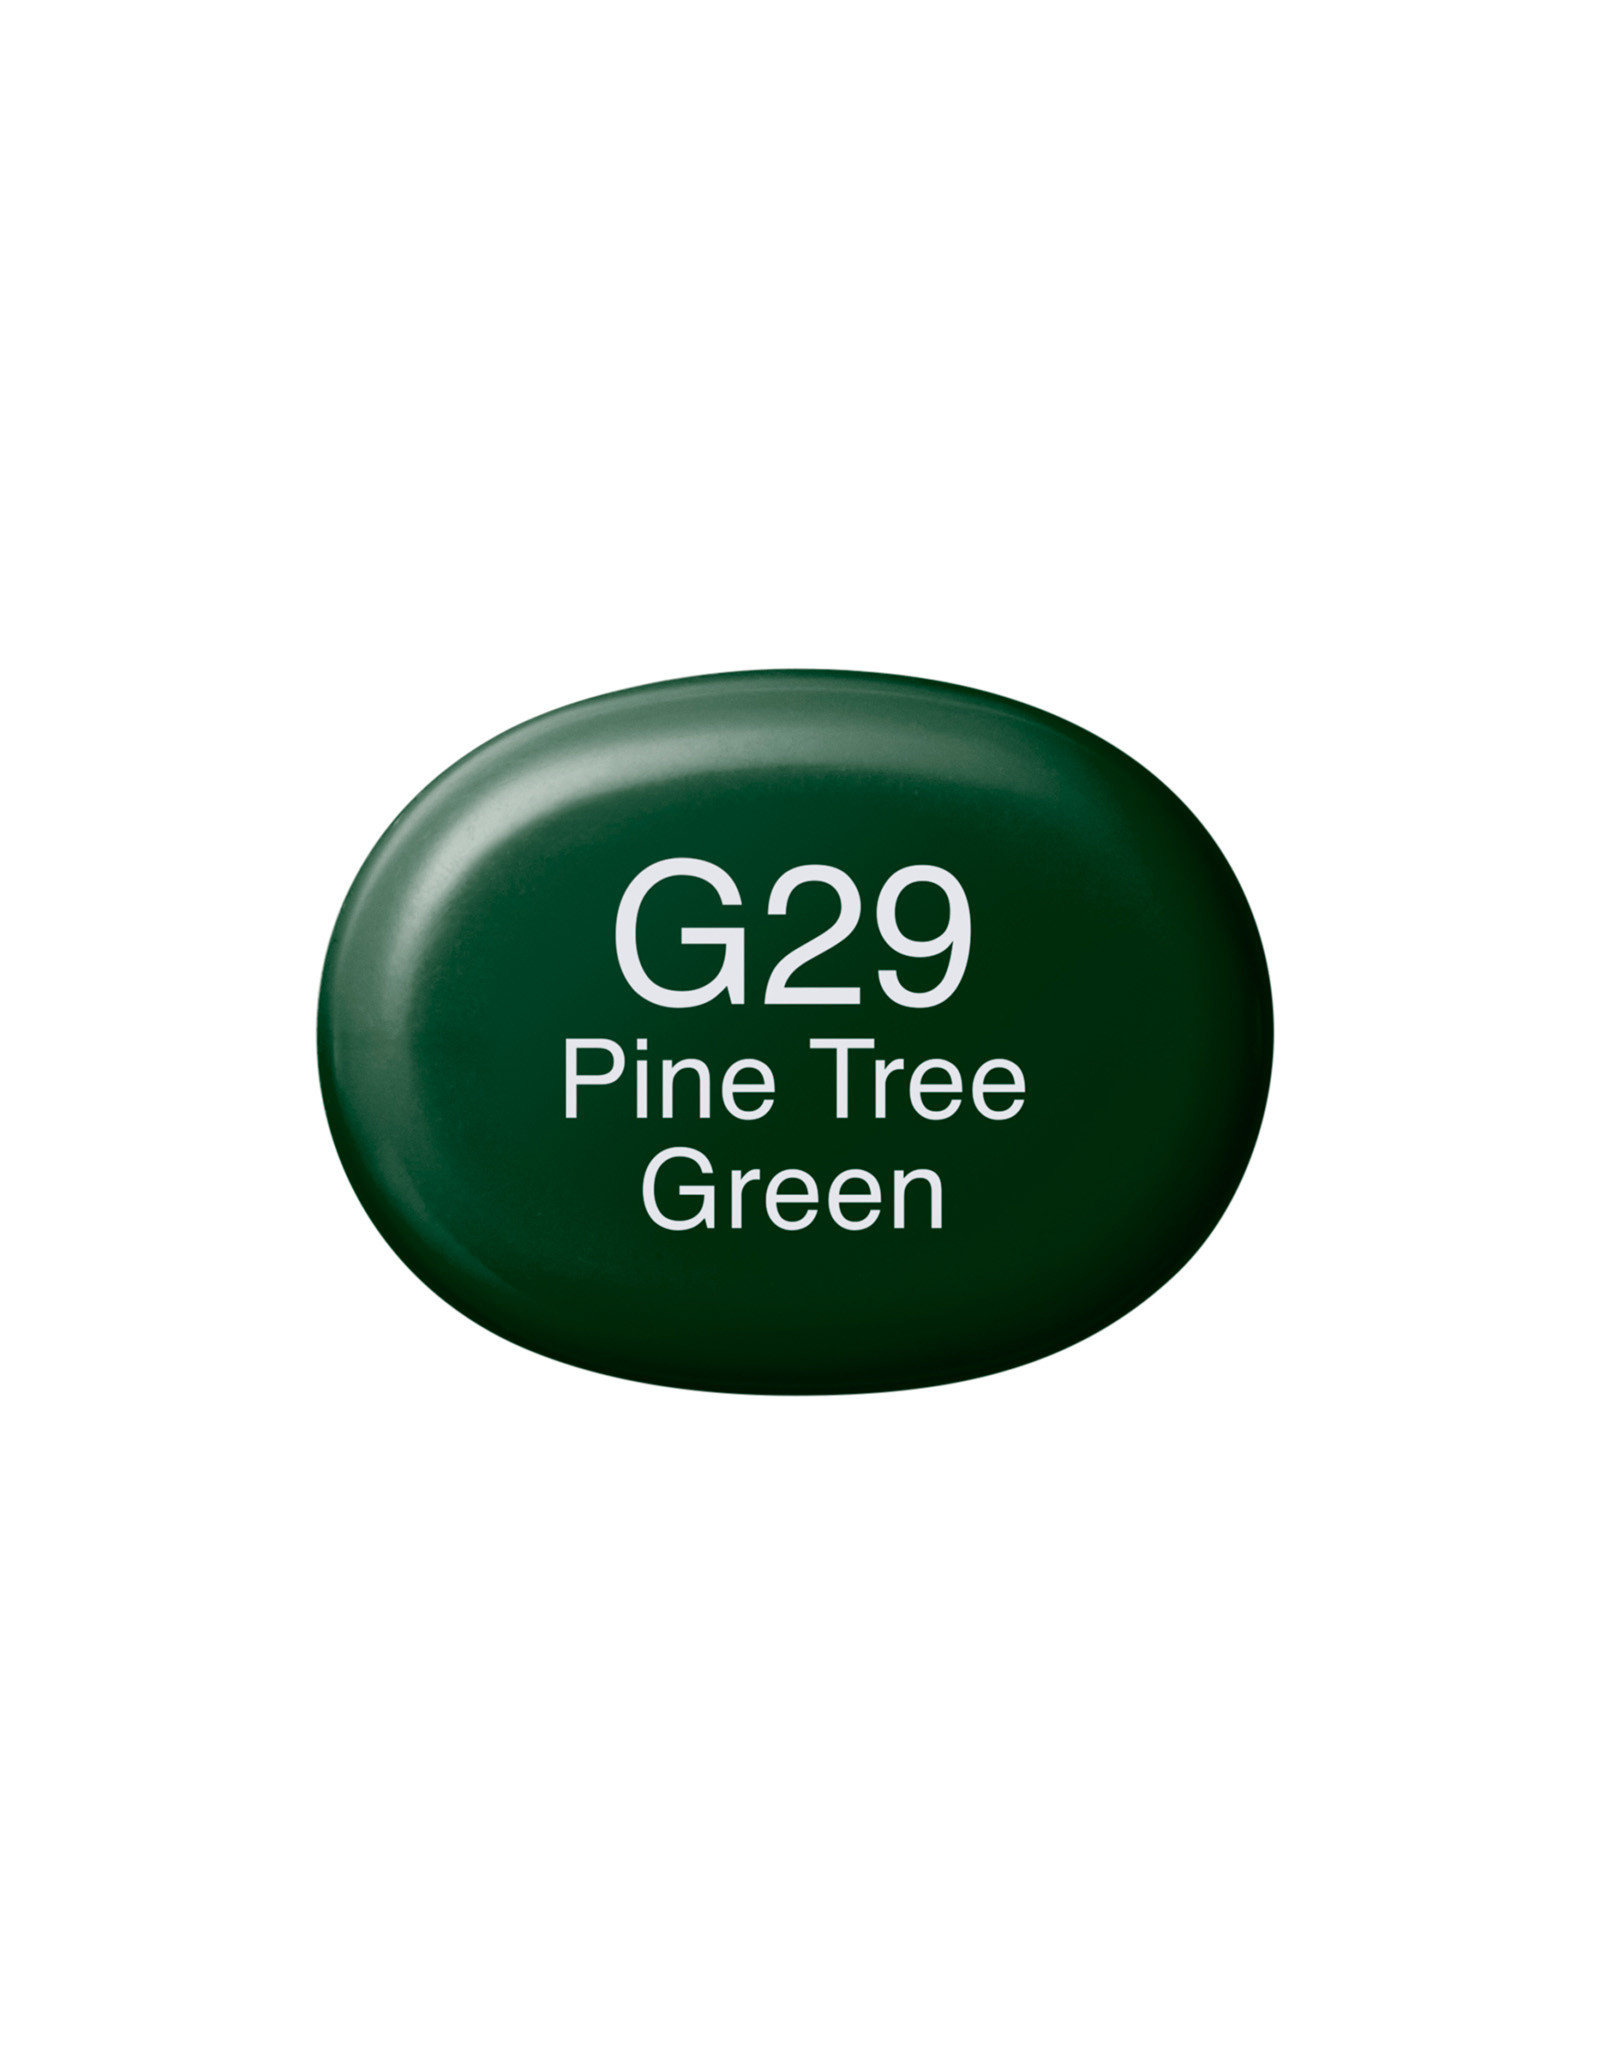 COPIC COPIC Sketch Marker G29 Pine Tree Green